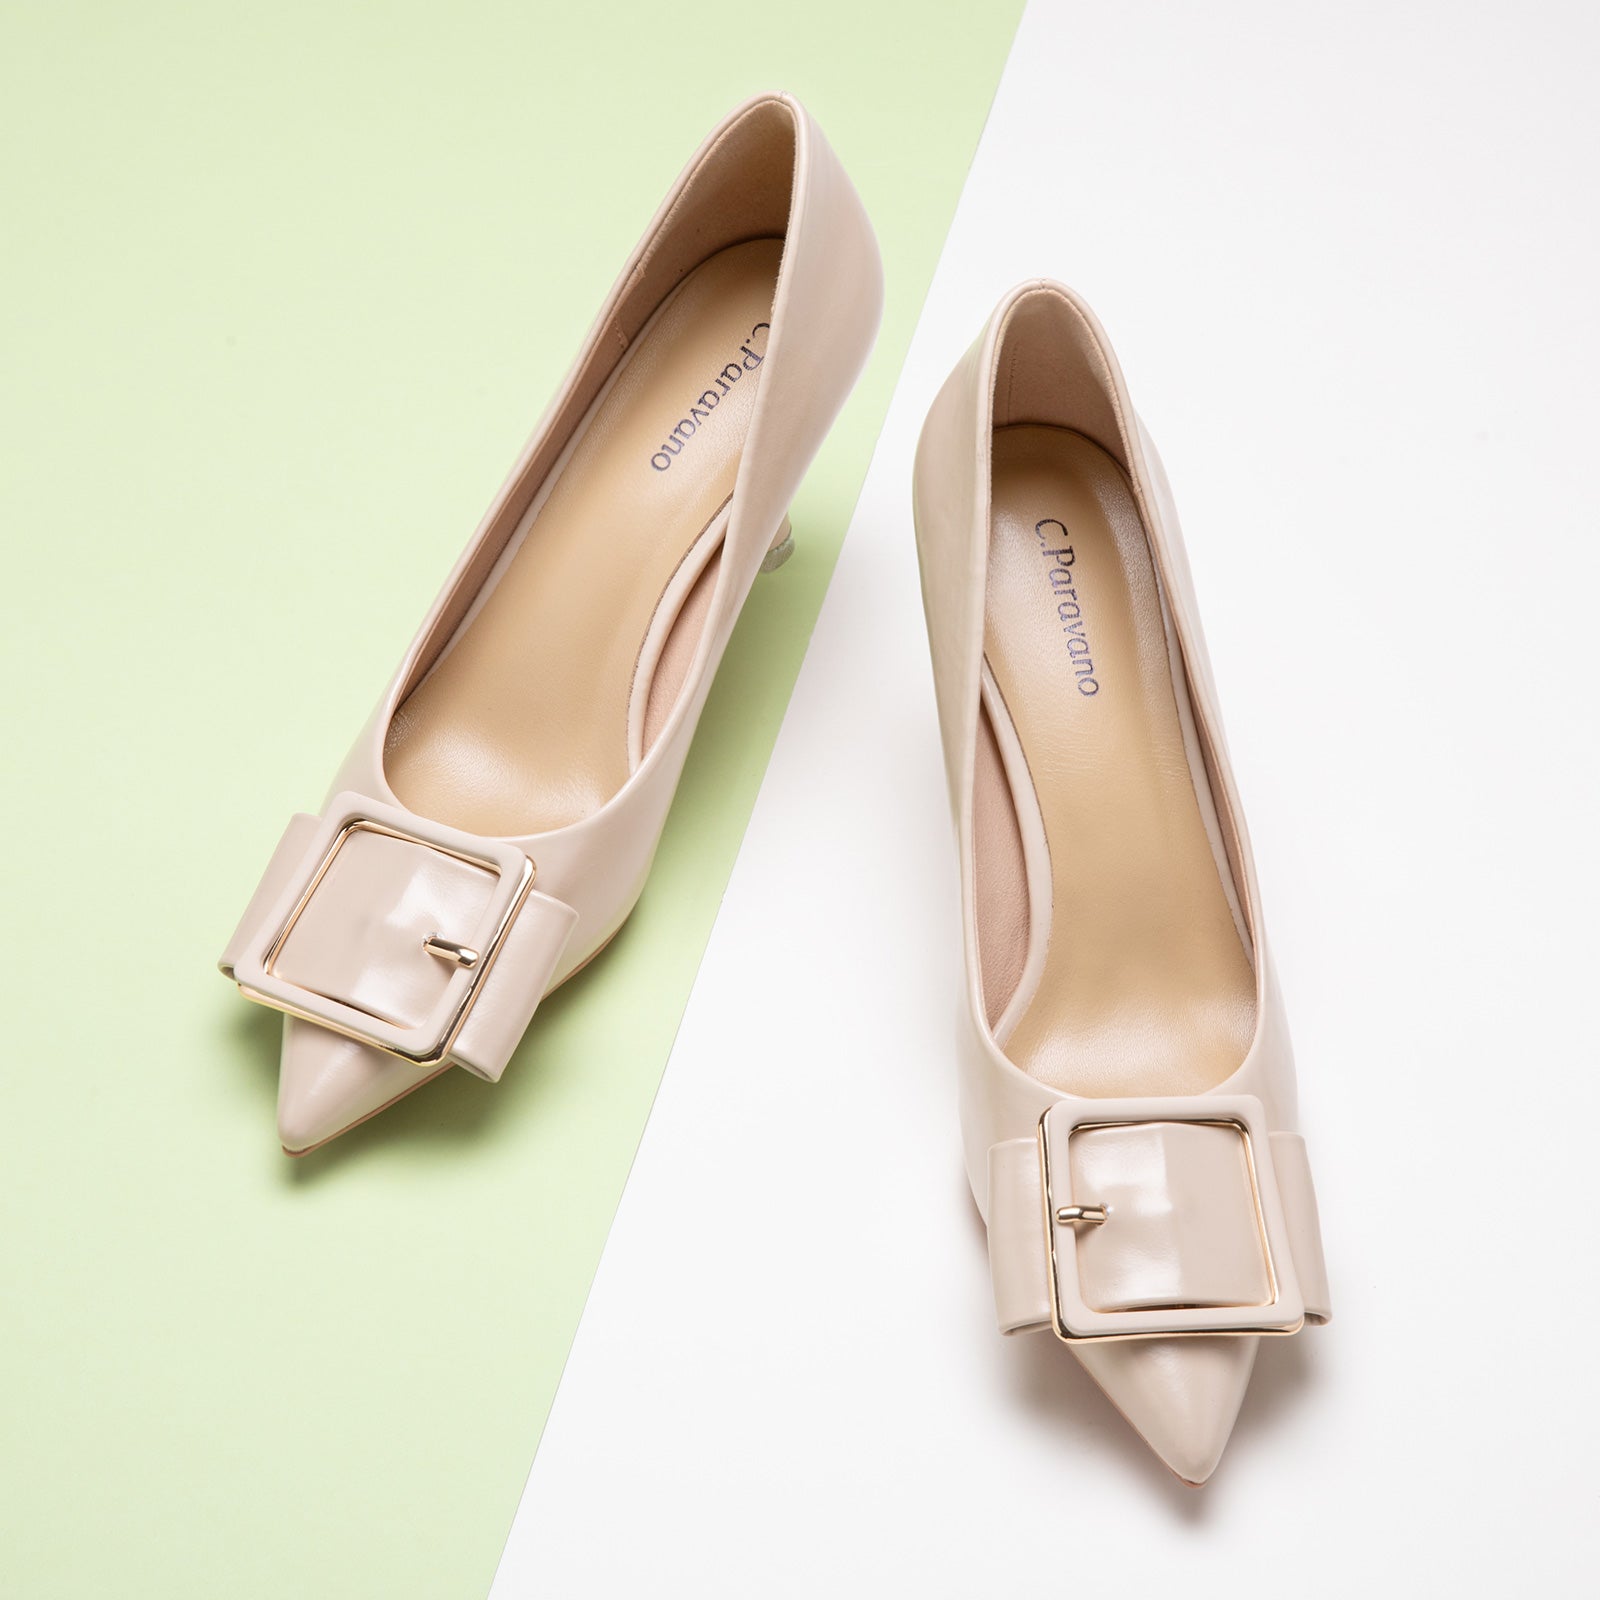  White Square Buckled Pumps, perfect for a confident and fashionable look in any urban setting